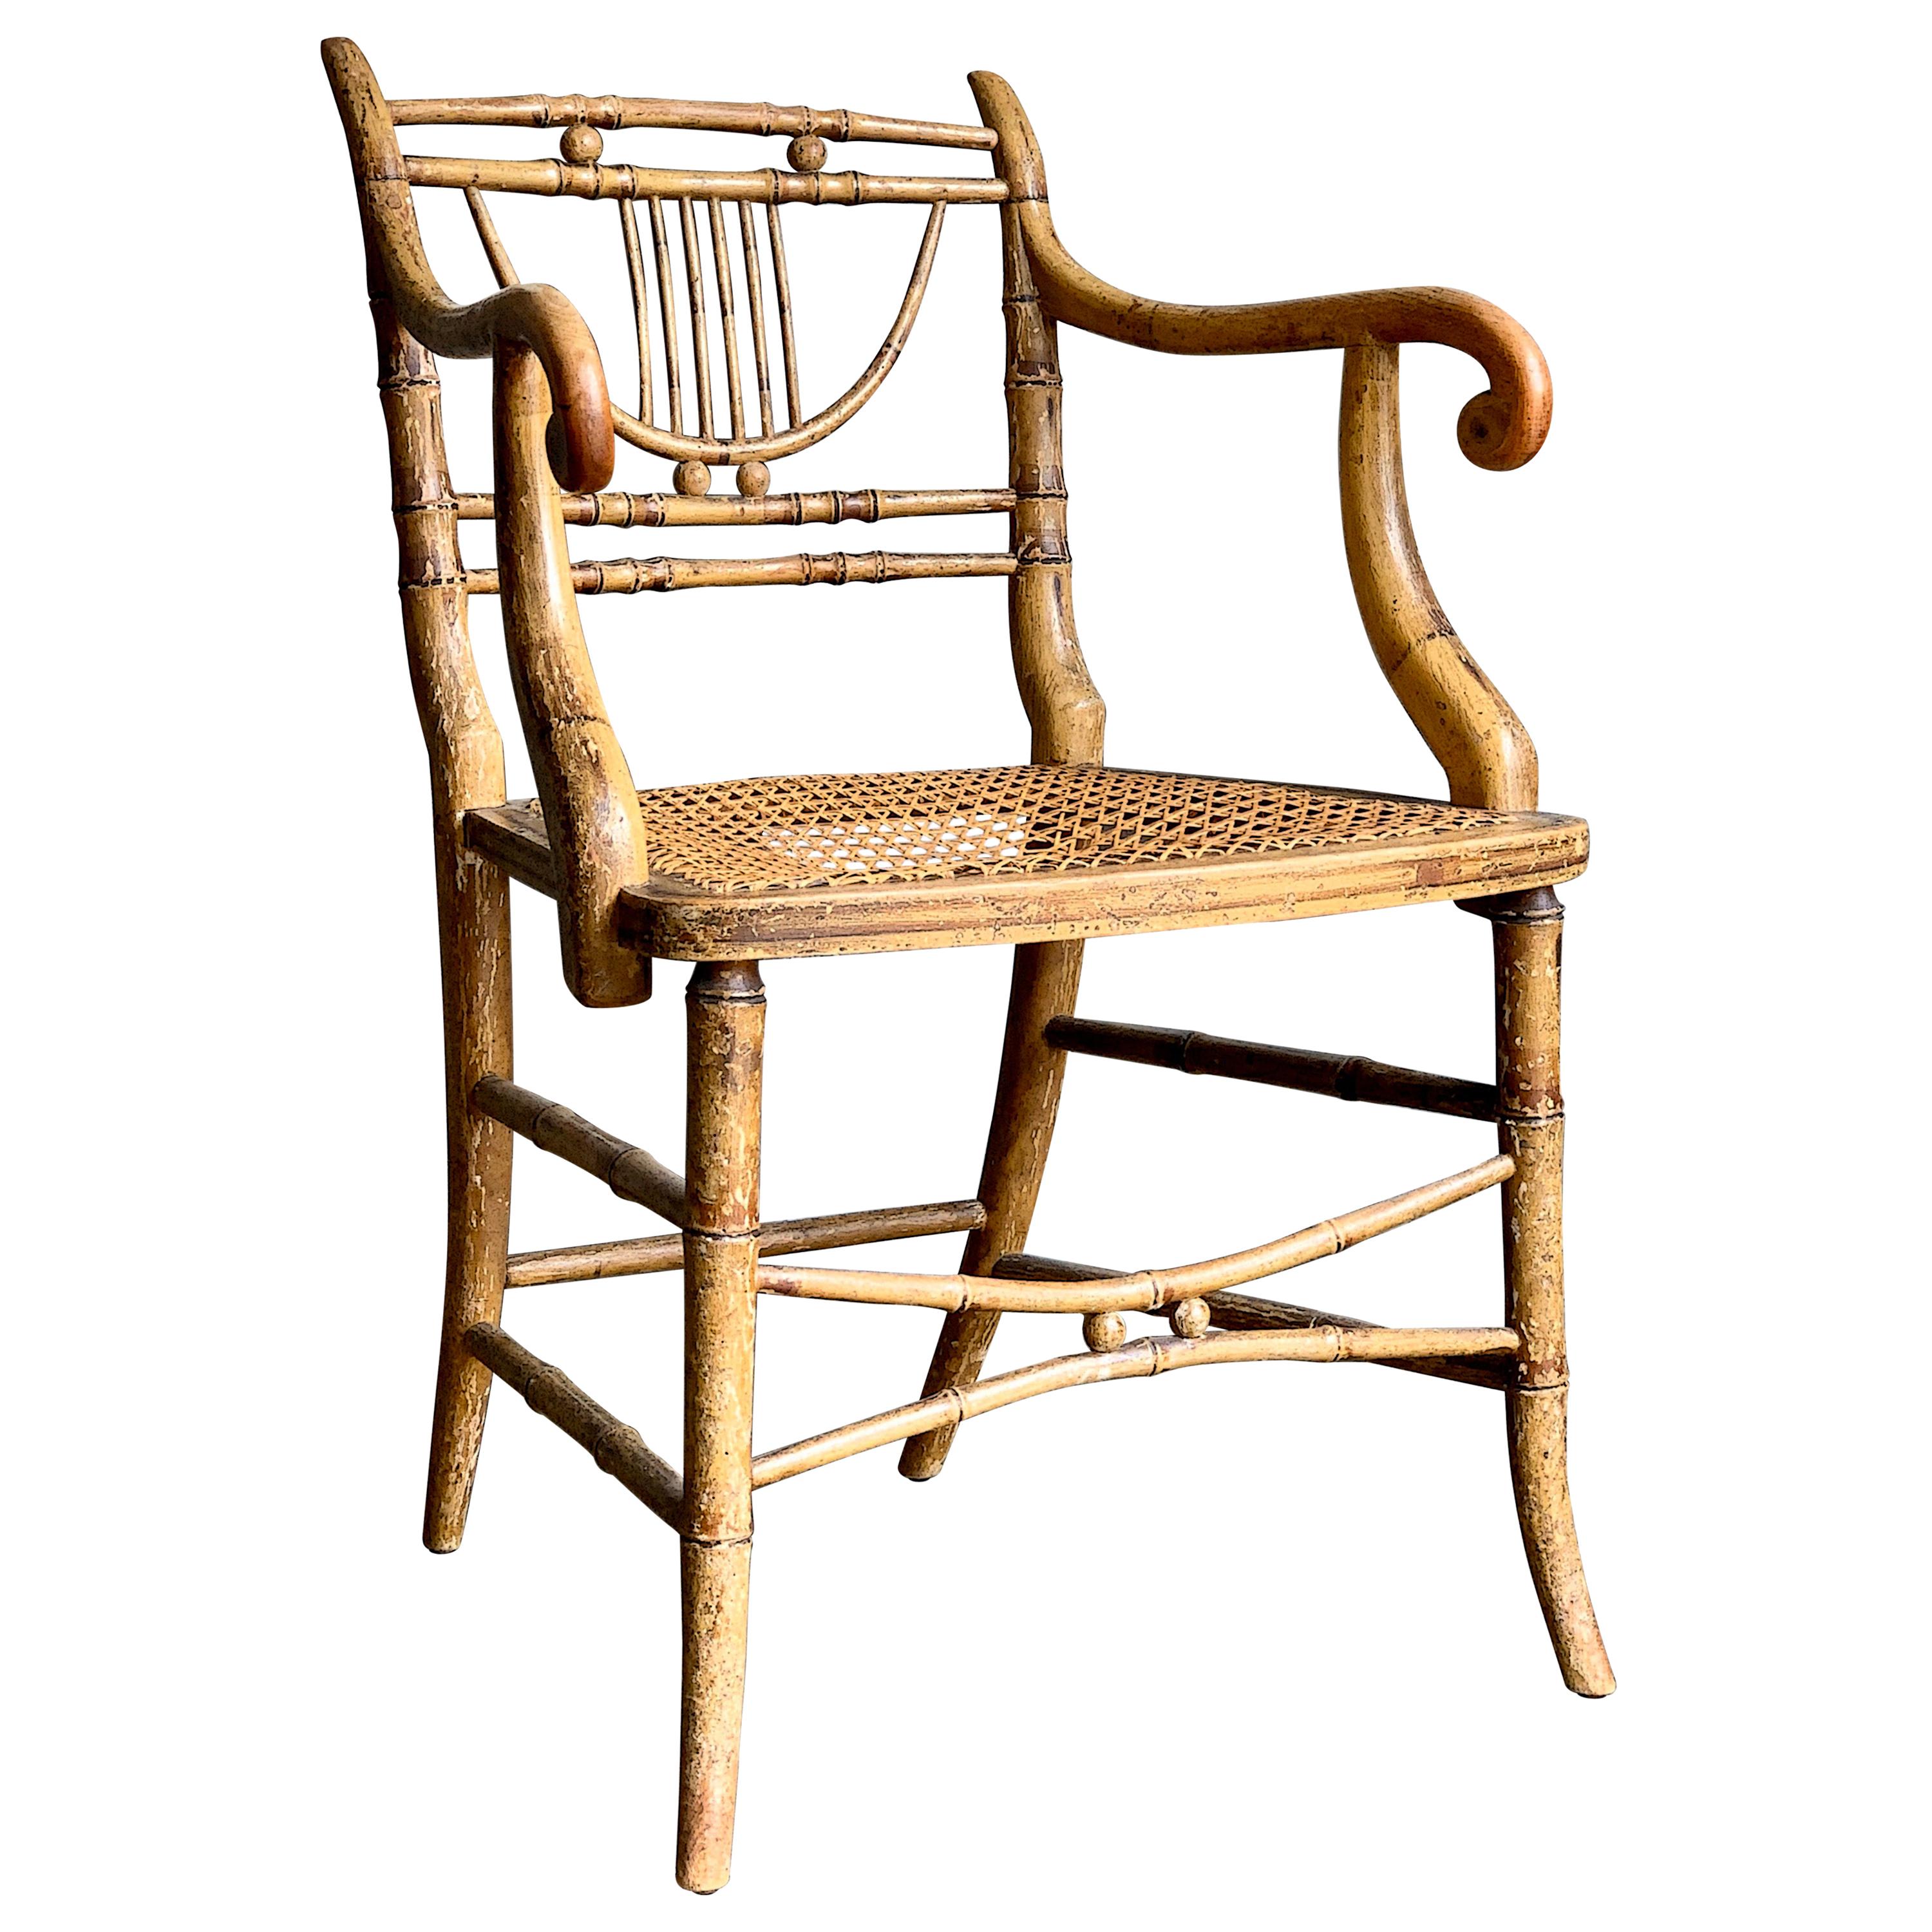 Early 19th Century Regency Period Faux Bamboo Armchair with Cane Seat For Sale